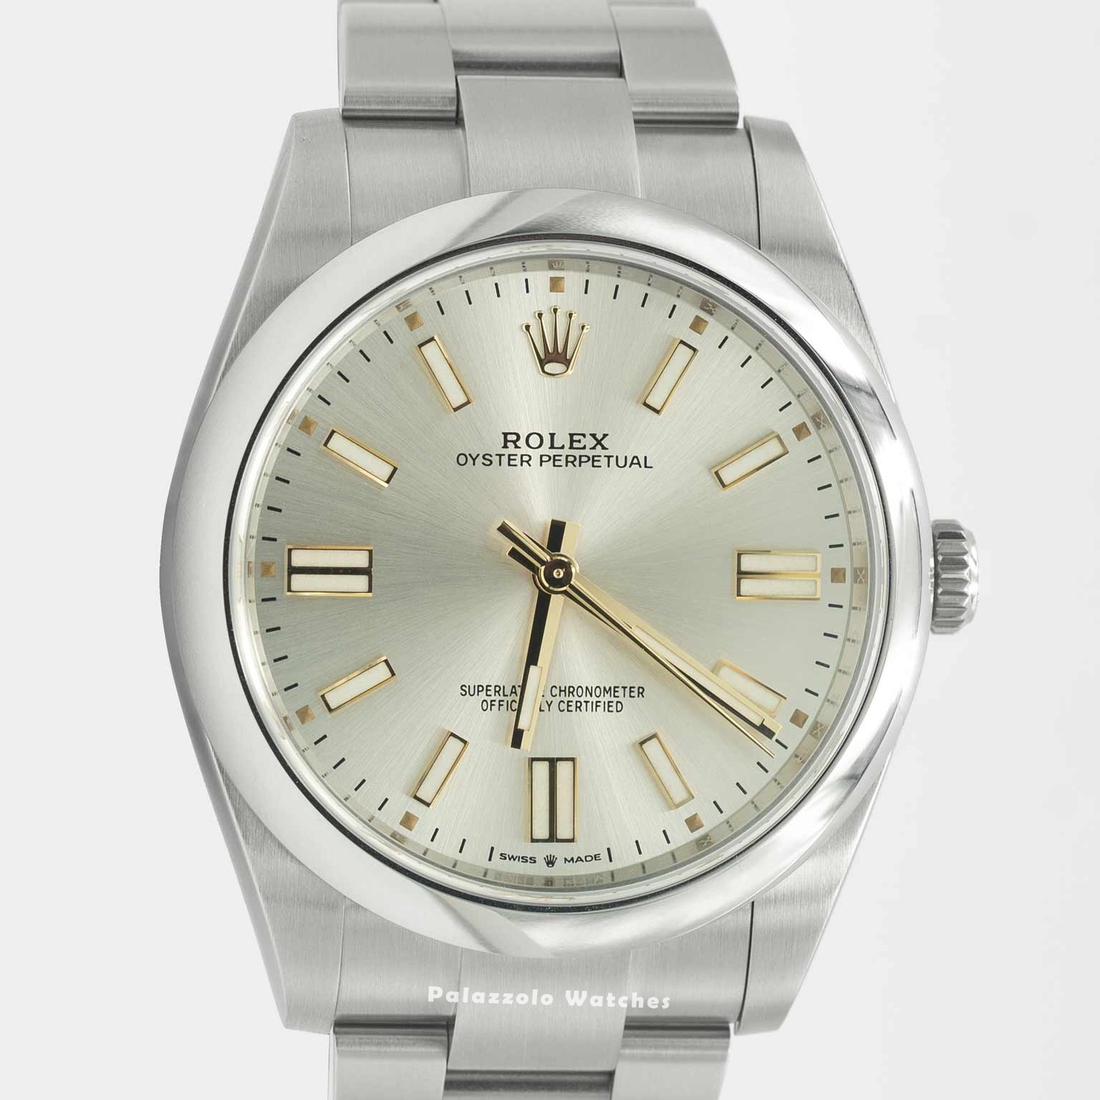 Rolex Oyster Perpetual 41 with Silver Dial & Oyster Bracelet - Palazzolo Watches